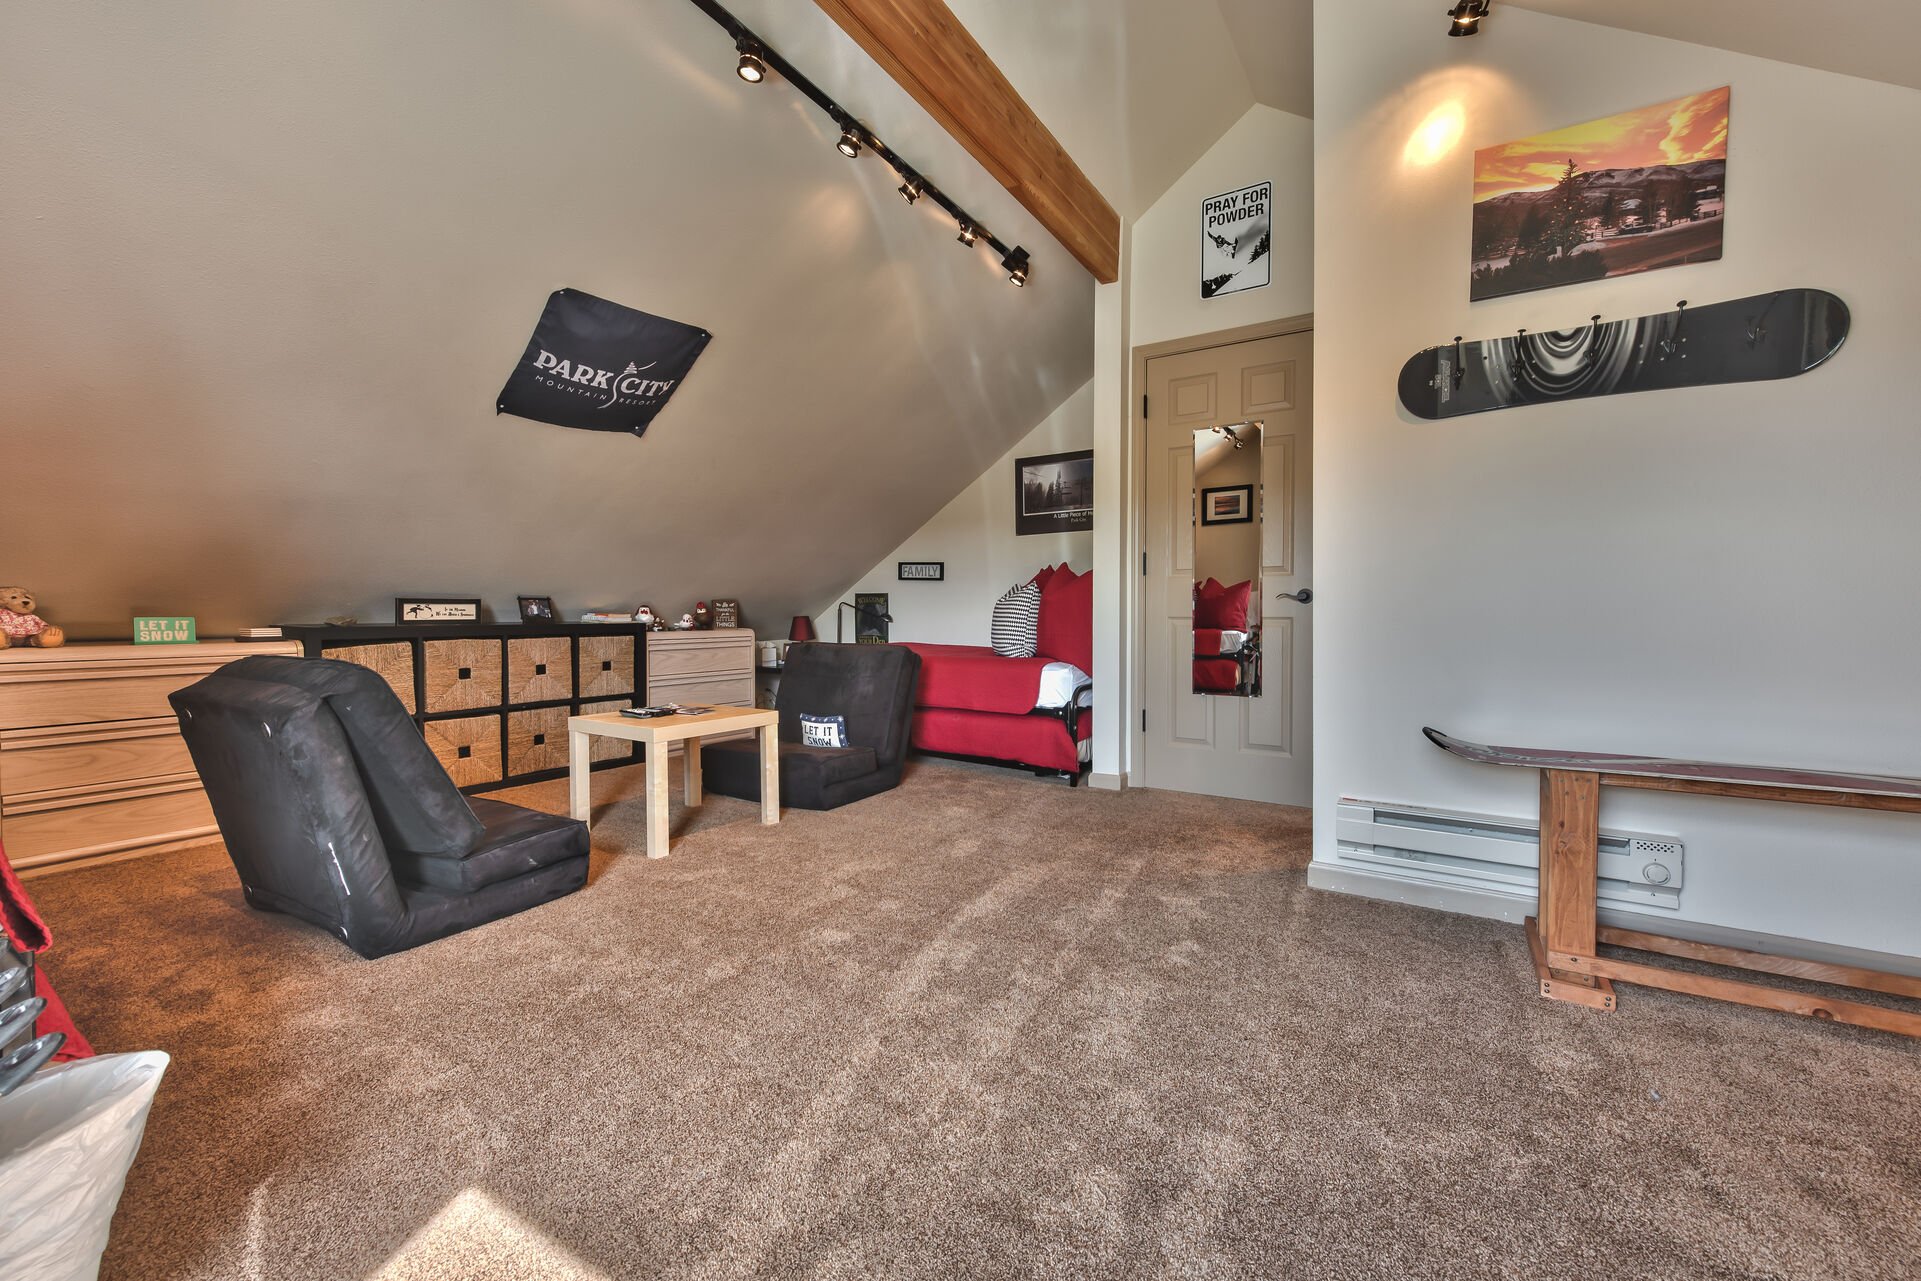 Loft - Bedroom with Two Twin Beds, Both with a Twin Trundle, a Smart TV, and a Reading Nook